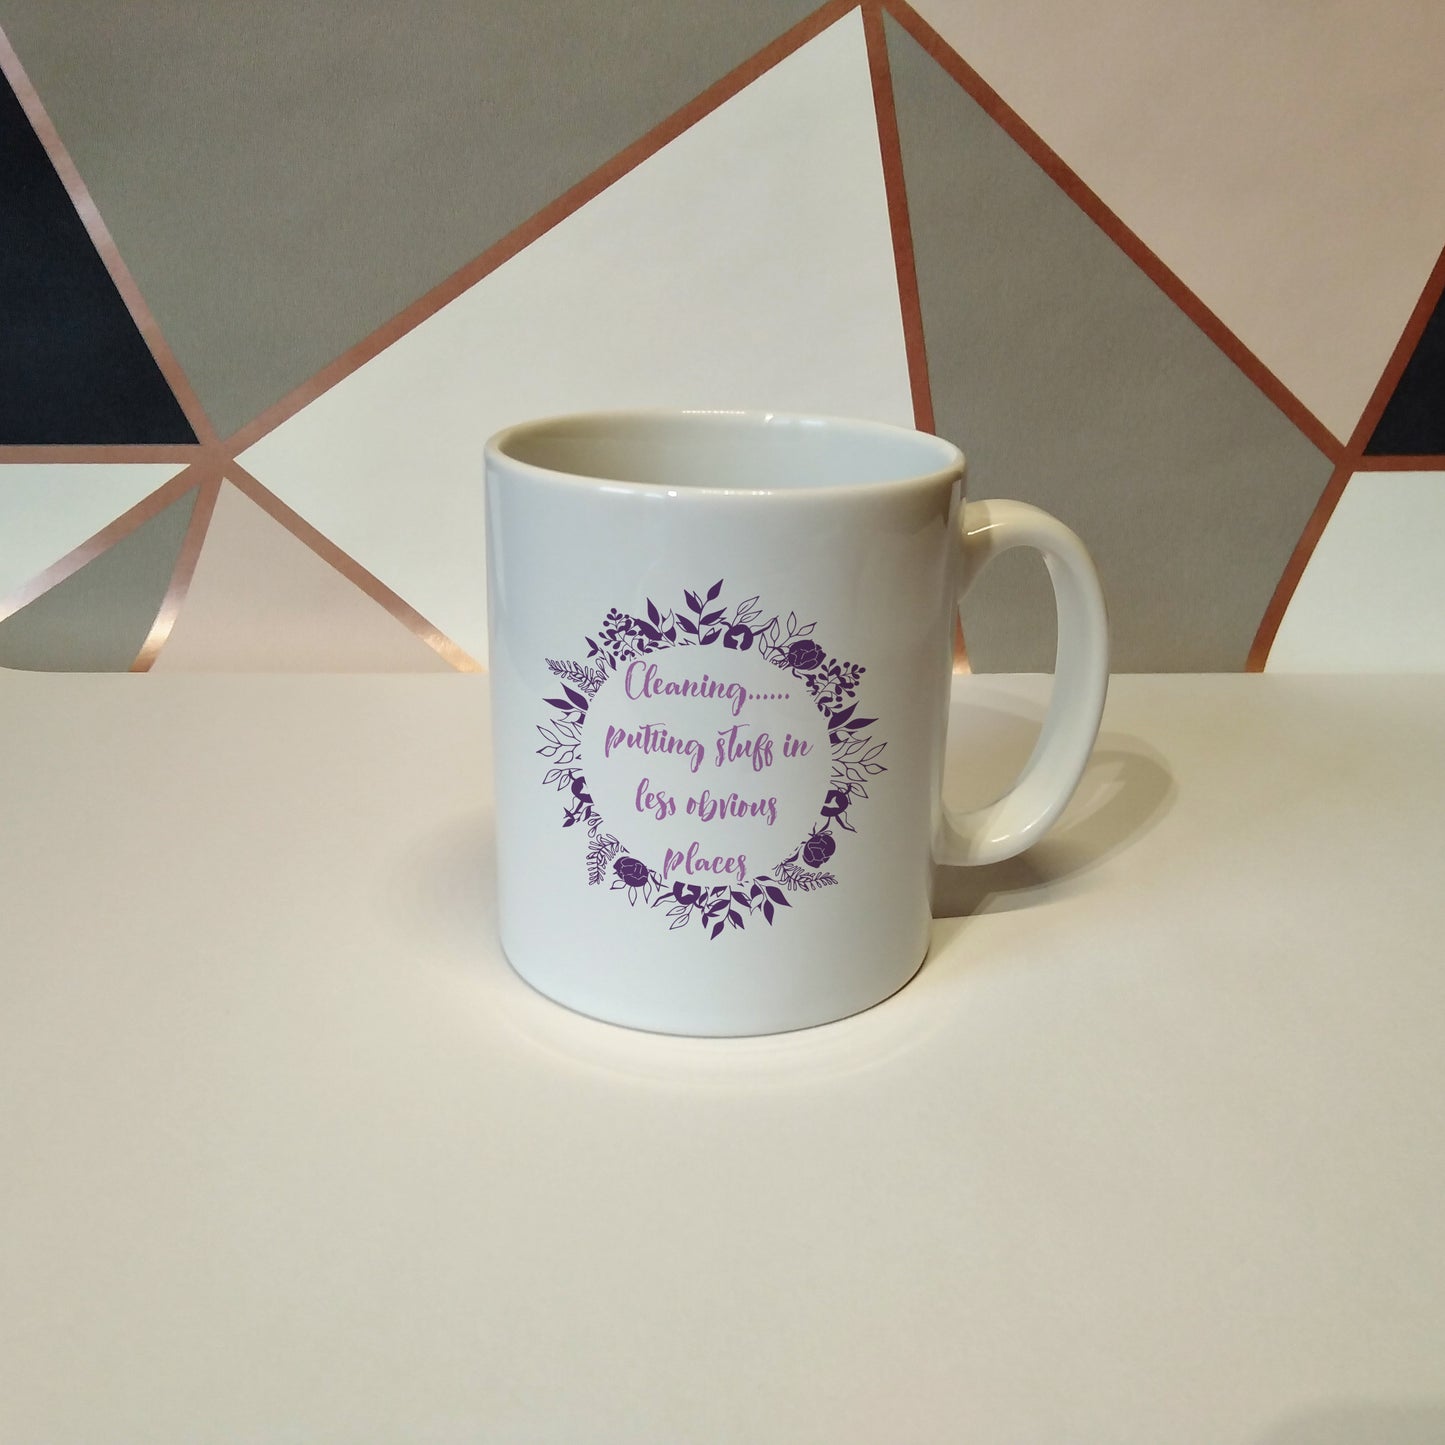 Cleaning: Putting stuff in less obvious places | Ceramic mug